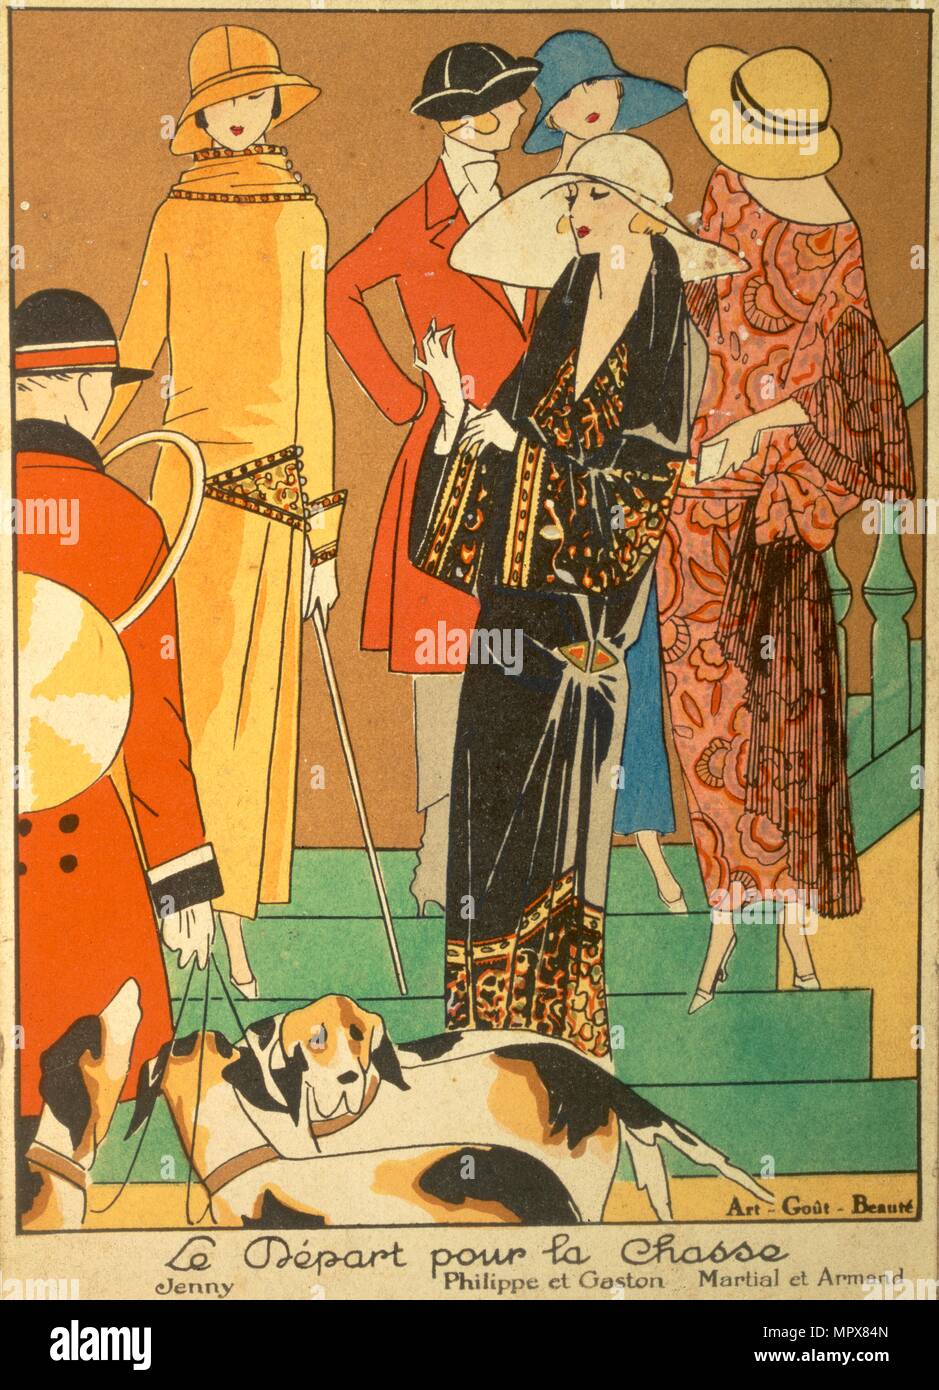 The Departure of the Hunt, fashion plate from 'Art, Gout, Beaute', pub. 1923 (pochoir print) Stock Photo